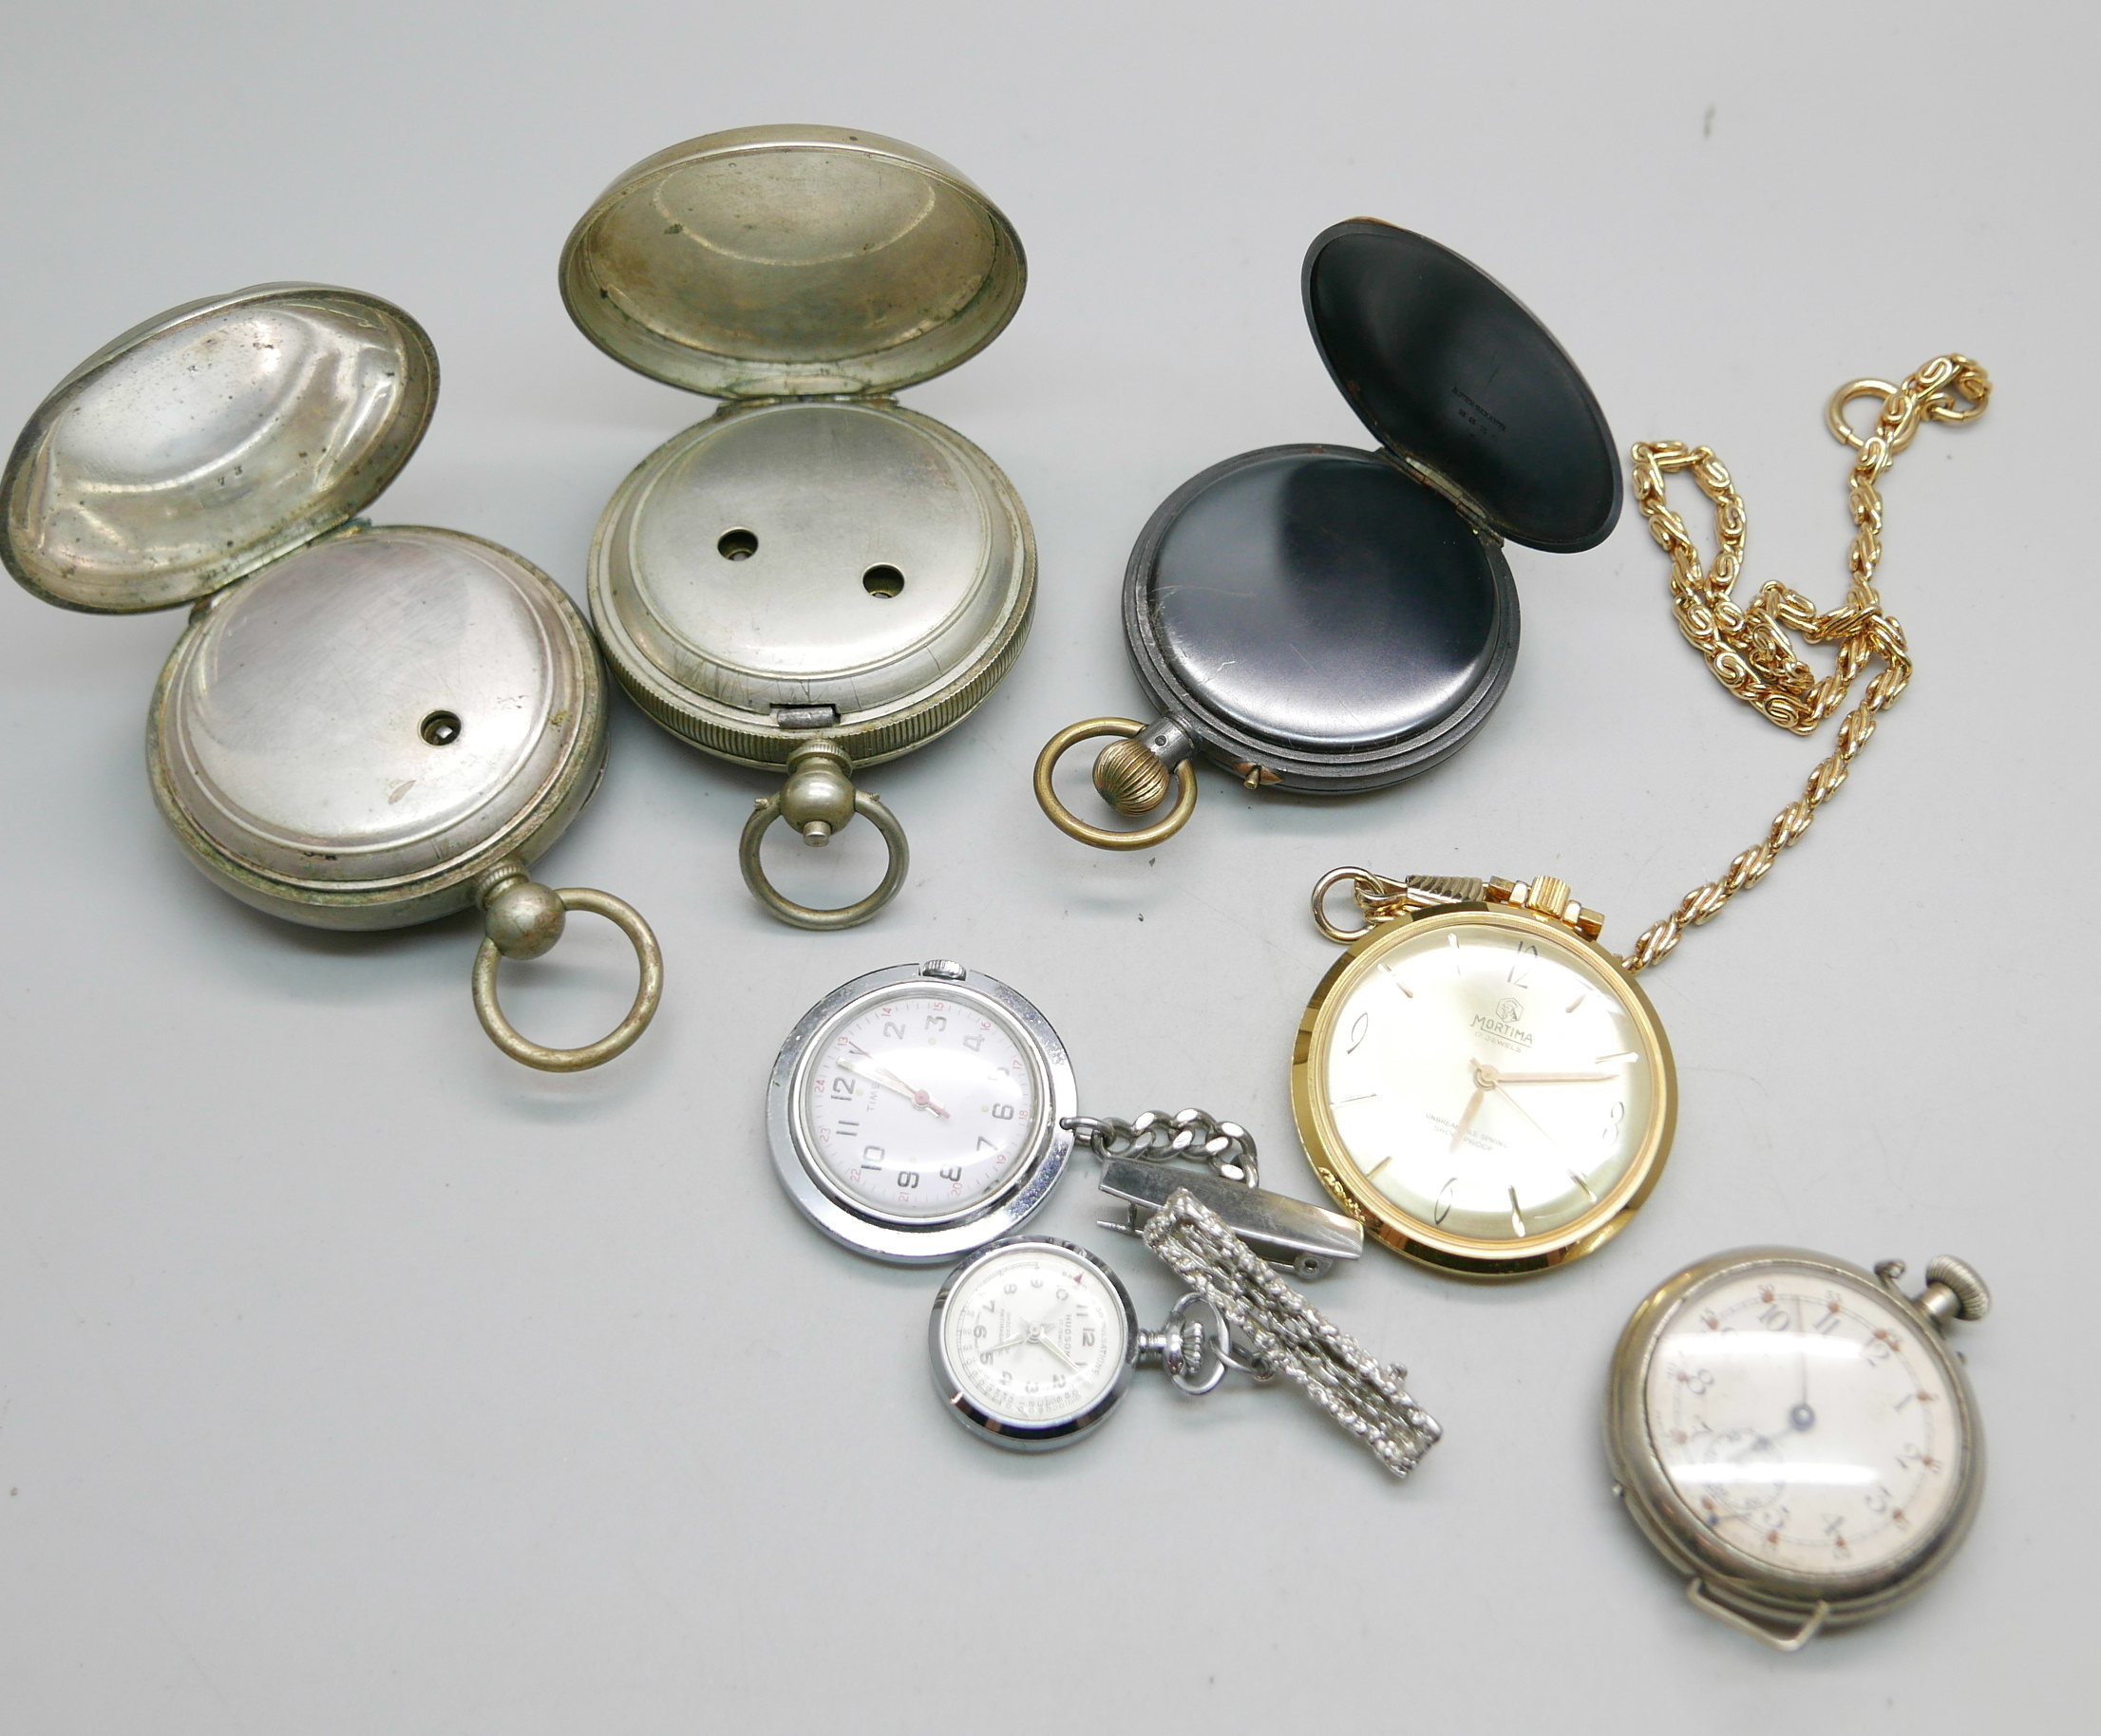 A Mortima dress pocket watch and other watches - Image 2 of 2